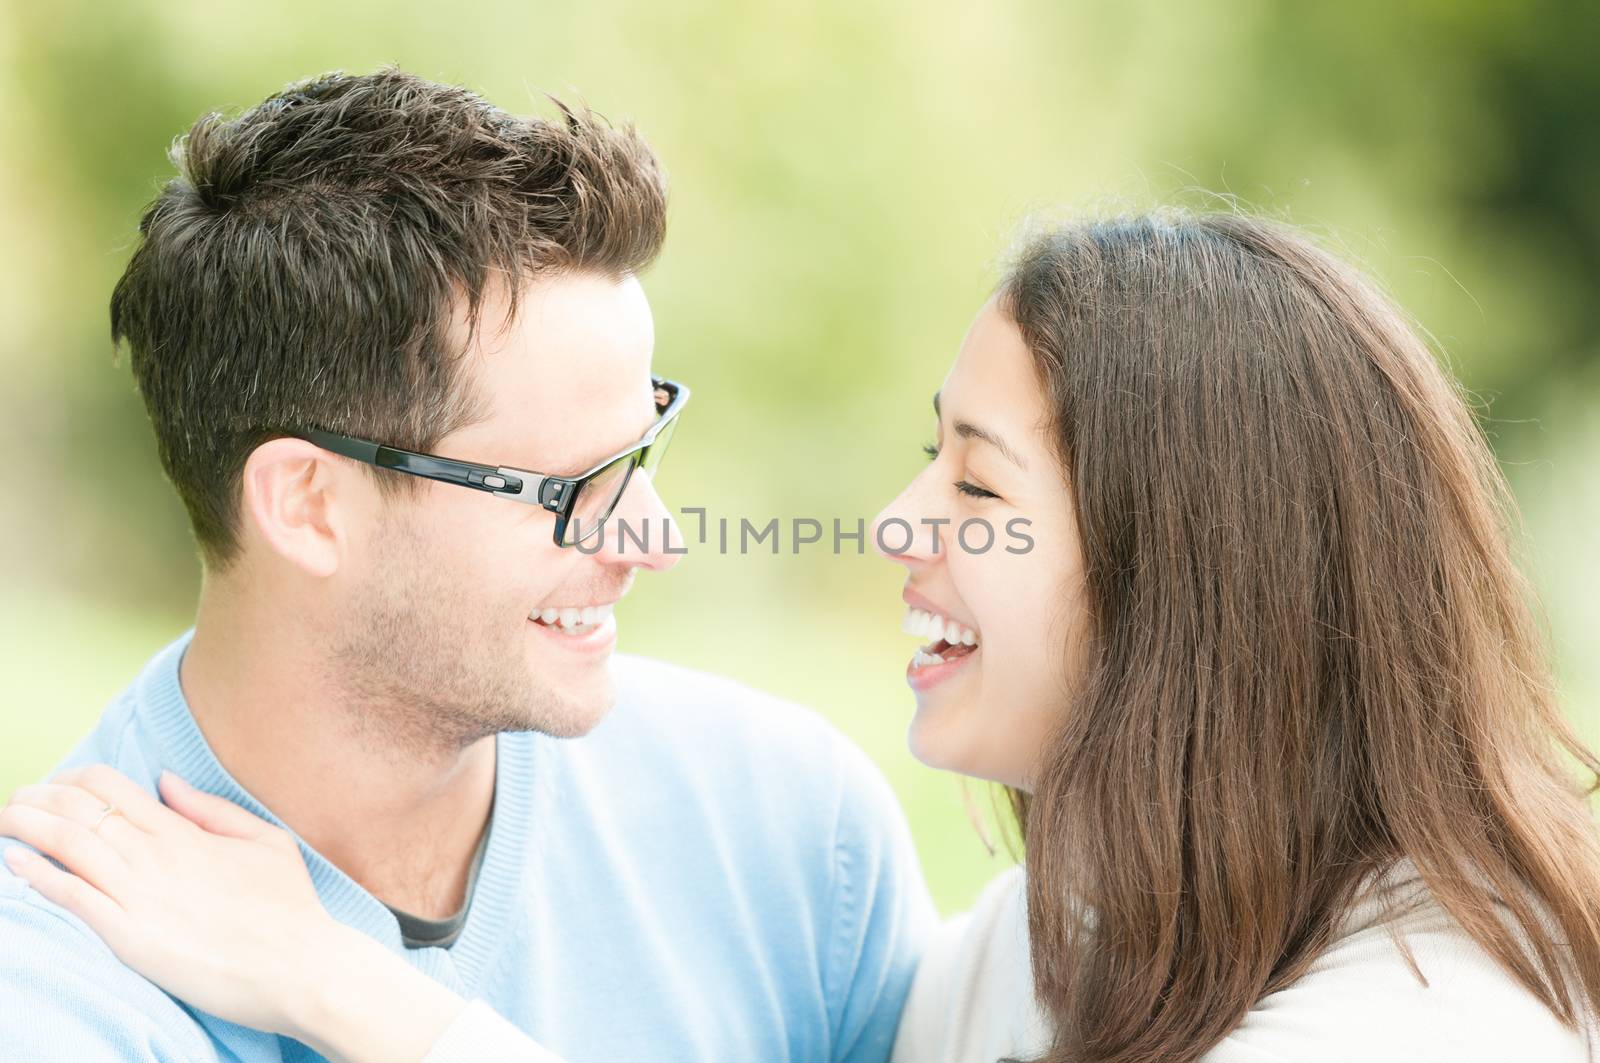 Portrait of beautiful romantic couple. People dating in park. Pretty woman with man in glasses and blue pullover. Green nature as background. Young positive family having leisure time outside.